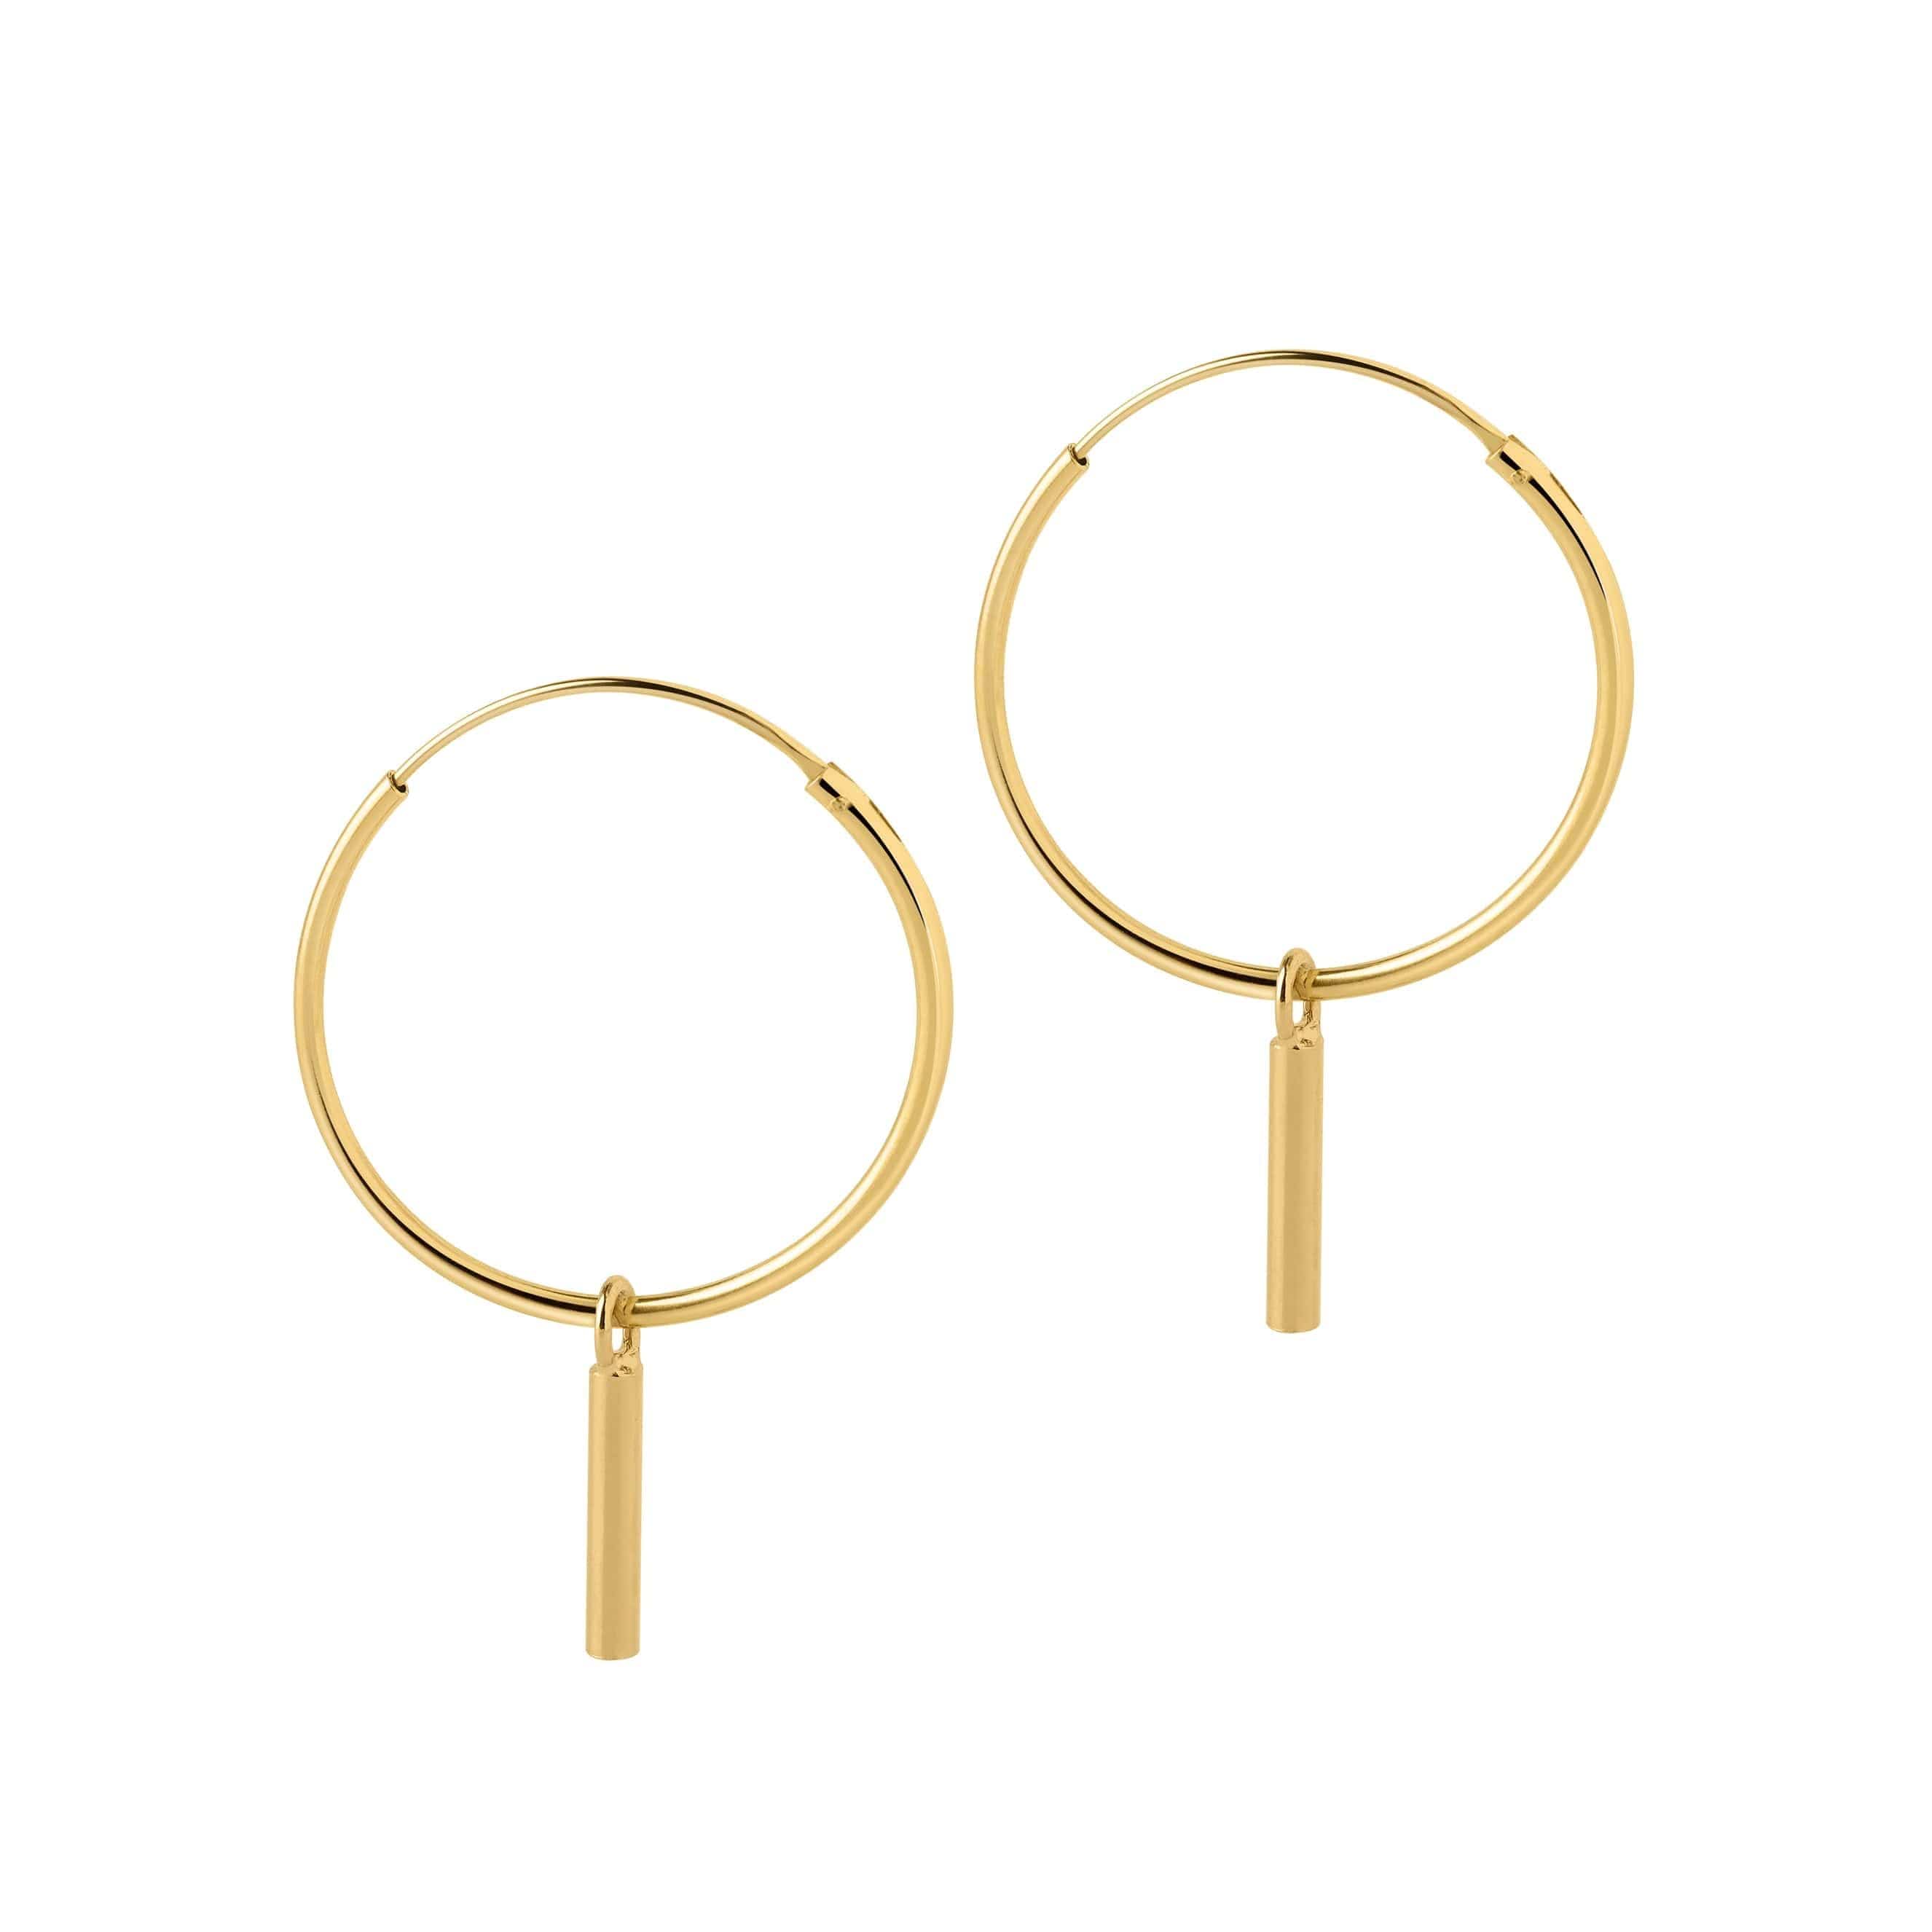 22mm gold plated hoop earrings with long rod